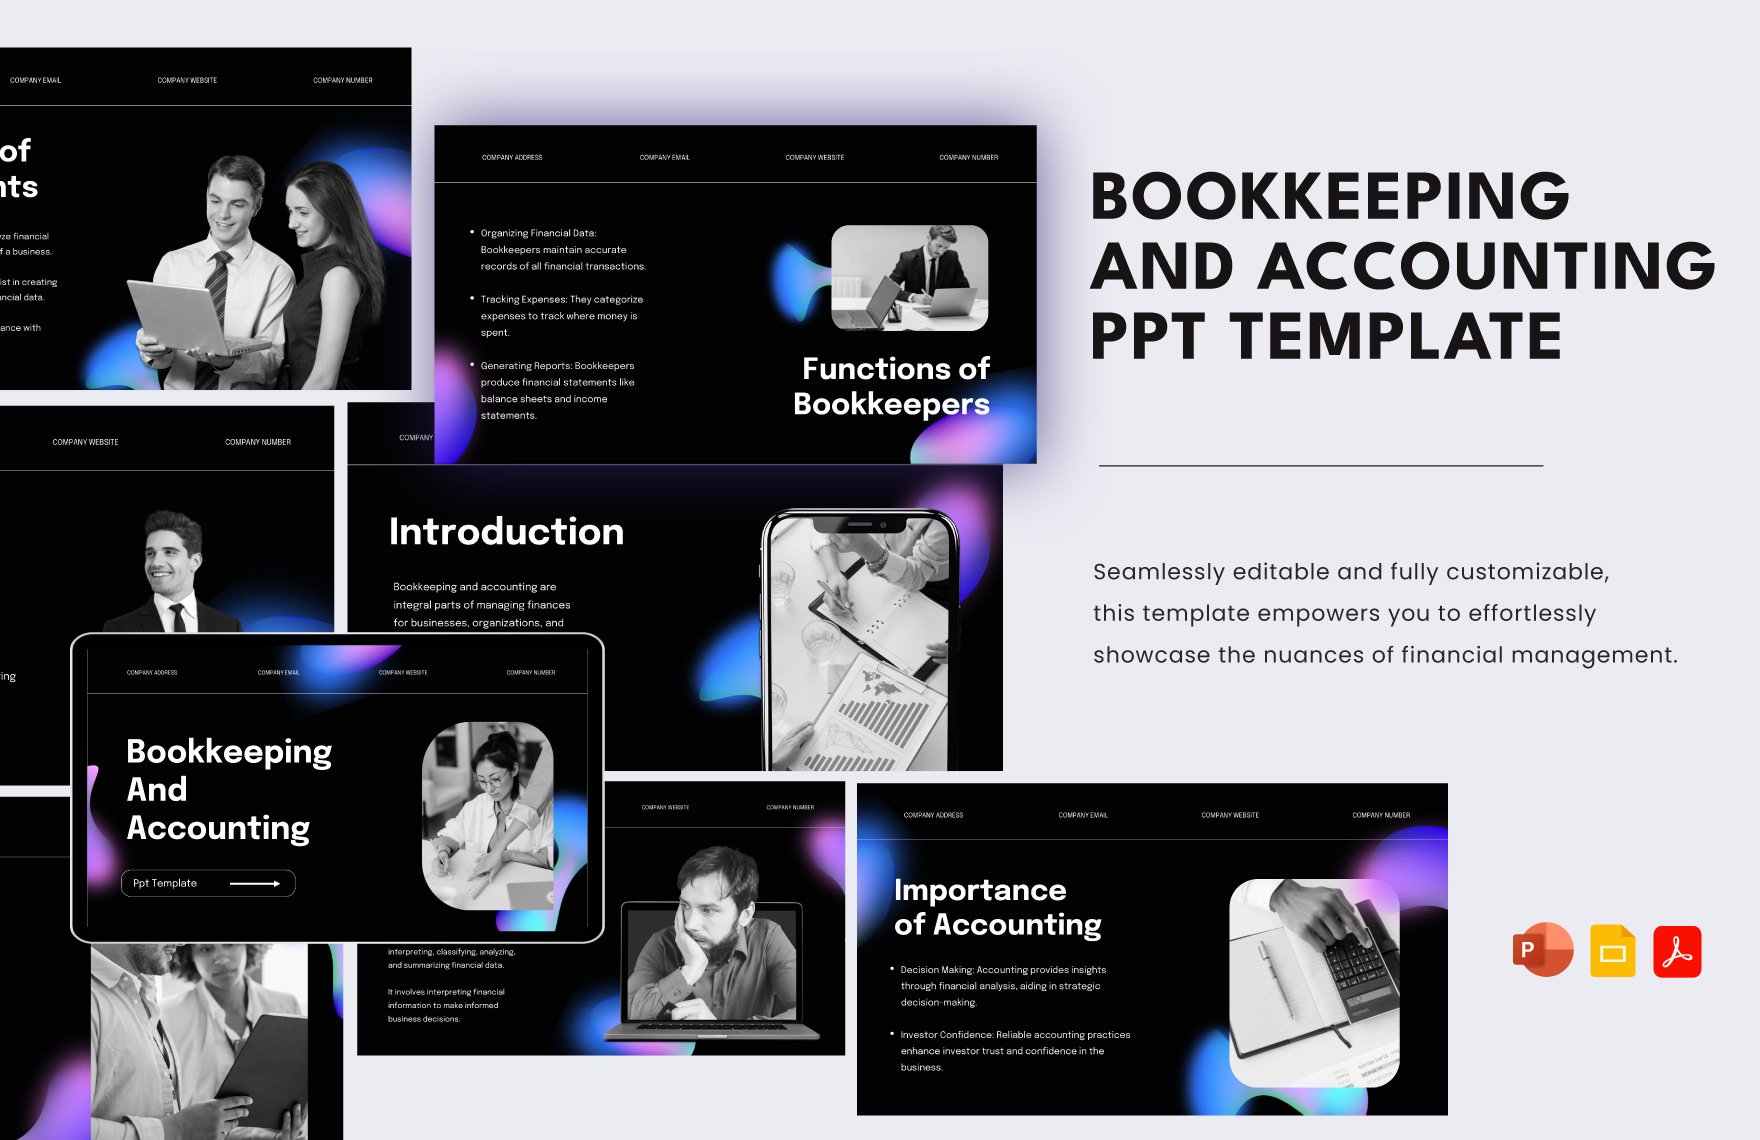 Bookkeeping and Accounting PPT Template in PDF, PowerPoint, Google Slides